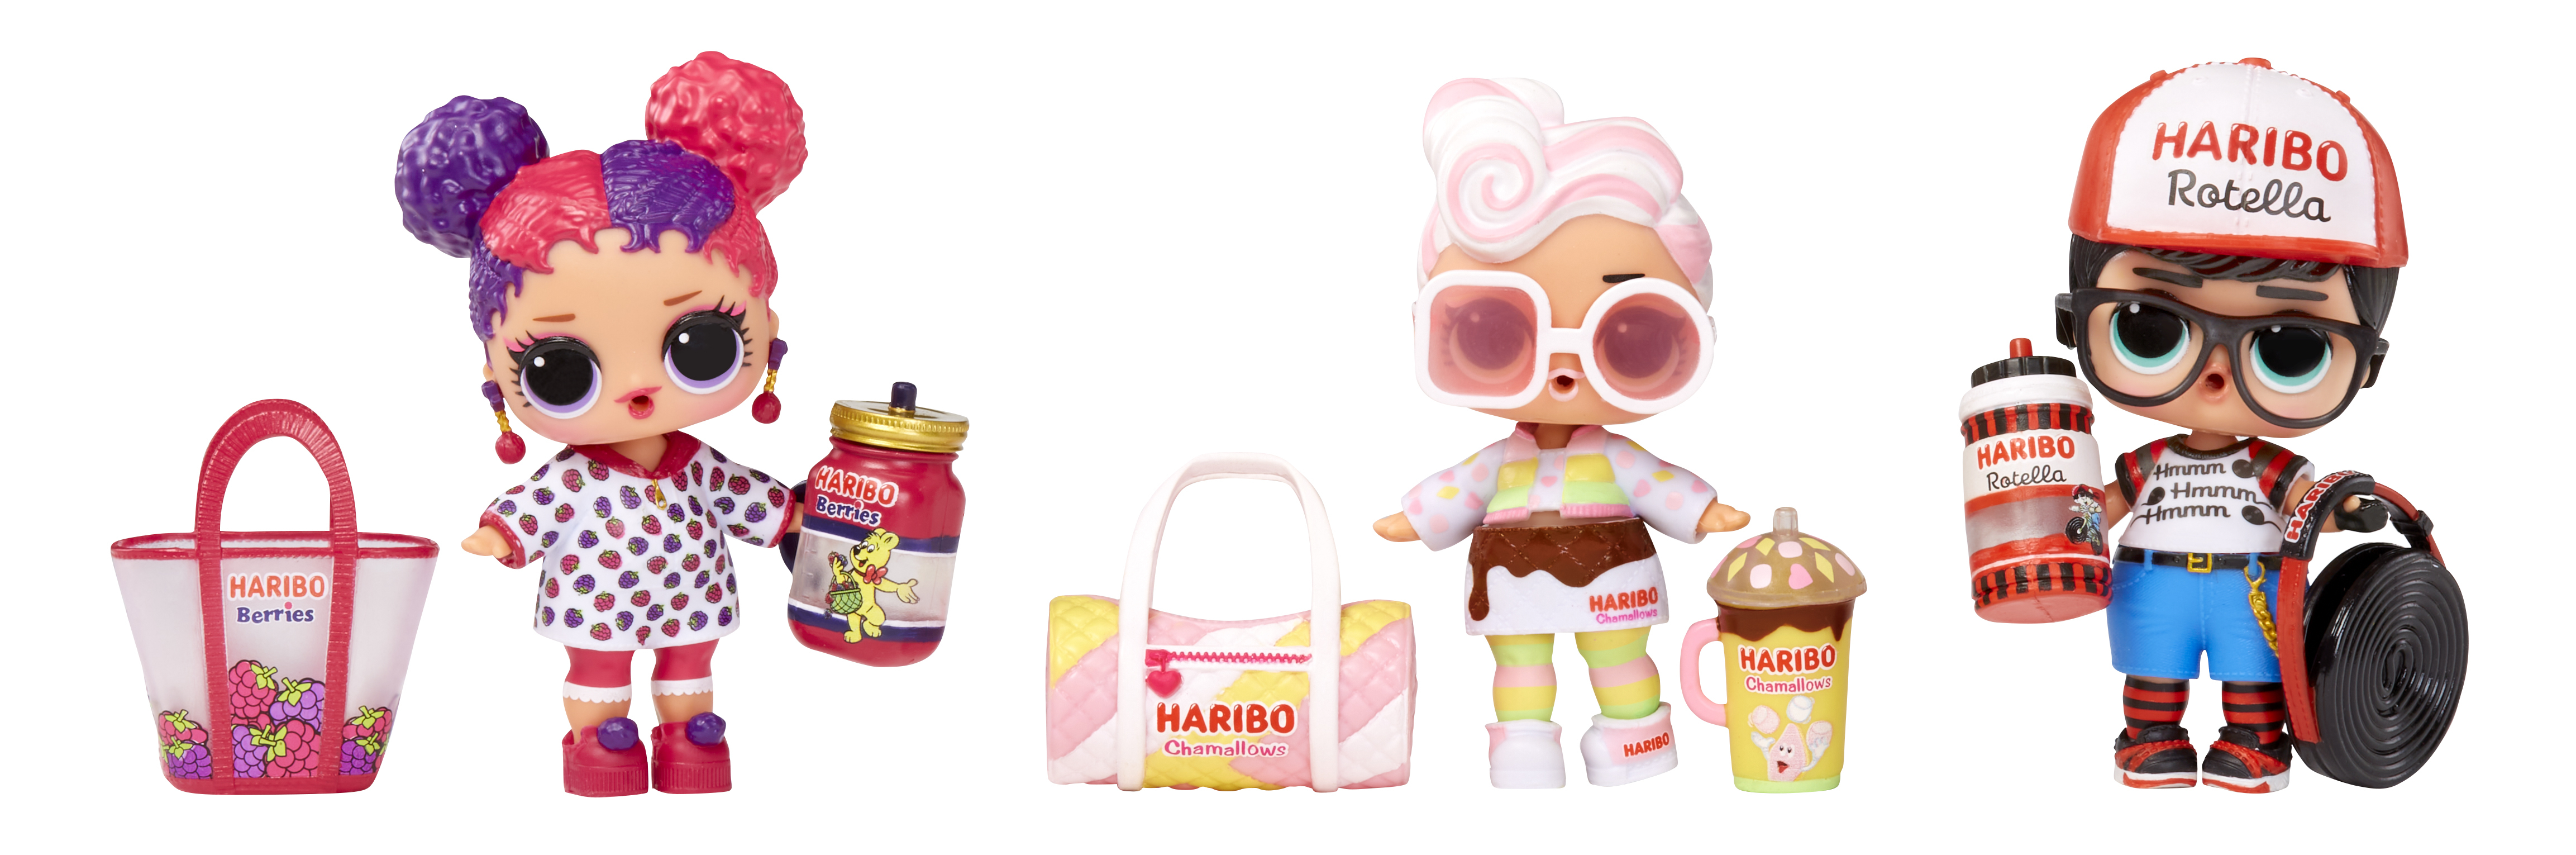 LOL Surprise Doll Haribo Mini Sweets MISSY MALLOW Brand New Same Day Post